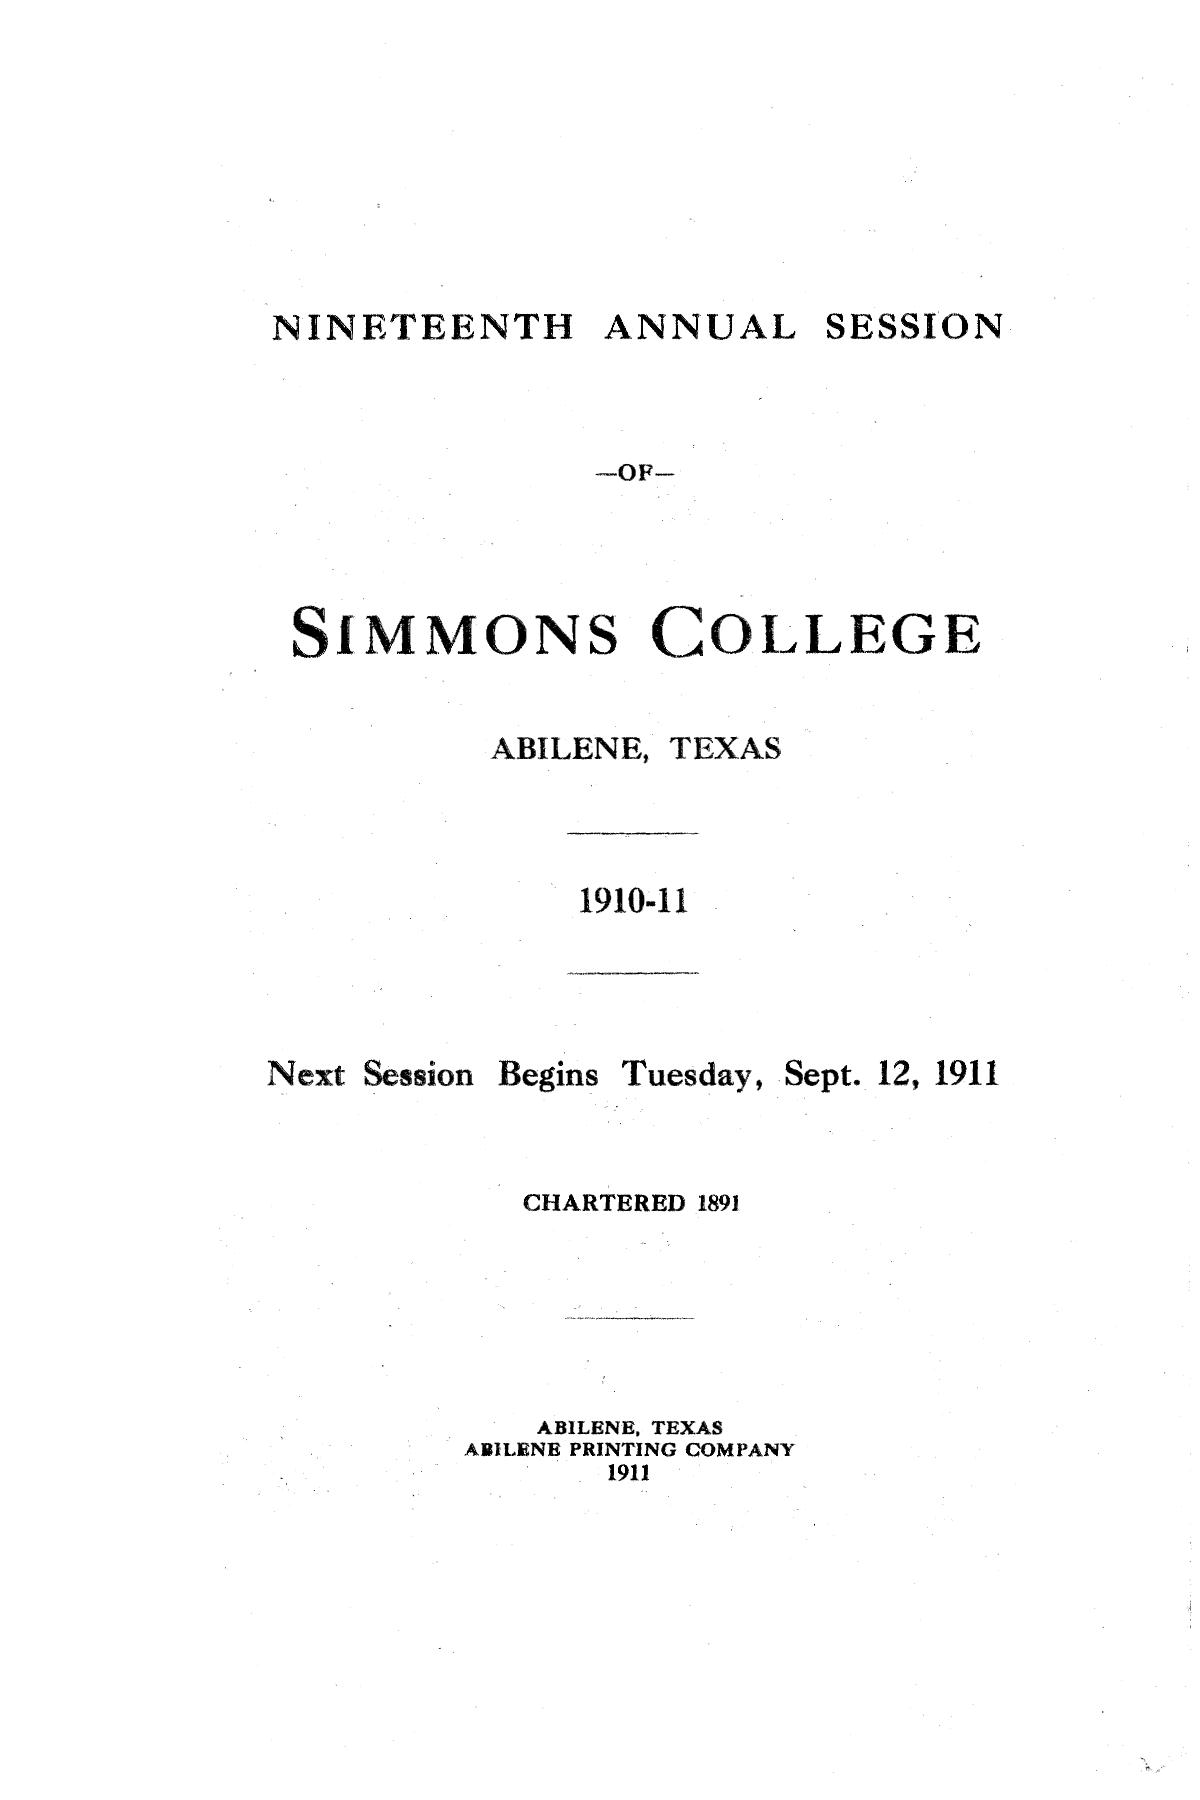 Catalogue of Simmons College, 1910-1911
                                                
                                                    None
                                                